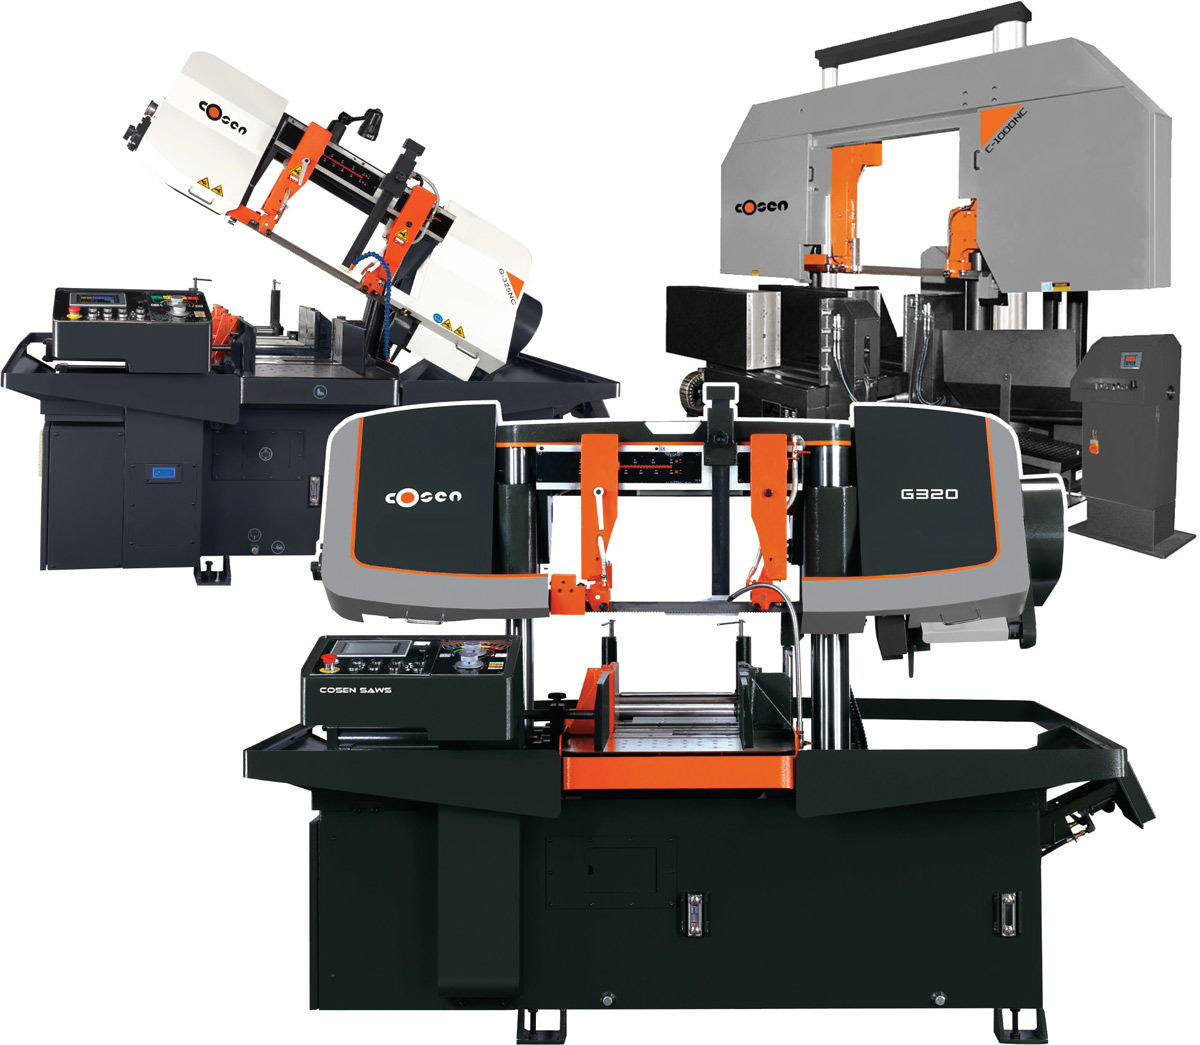 Cosen Saws’ G-320 and G-325NC saws are handling the lion’s share of tool steel cutting at Superior Die Set.